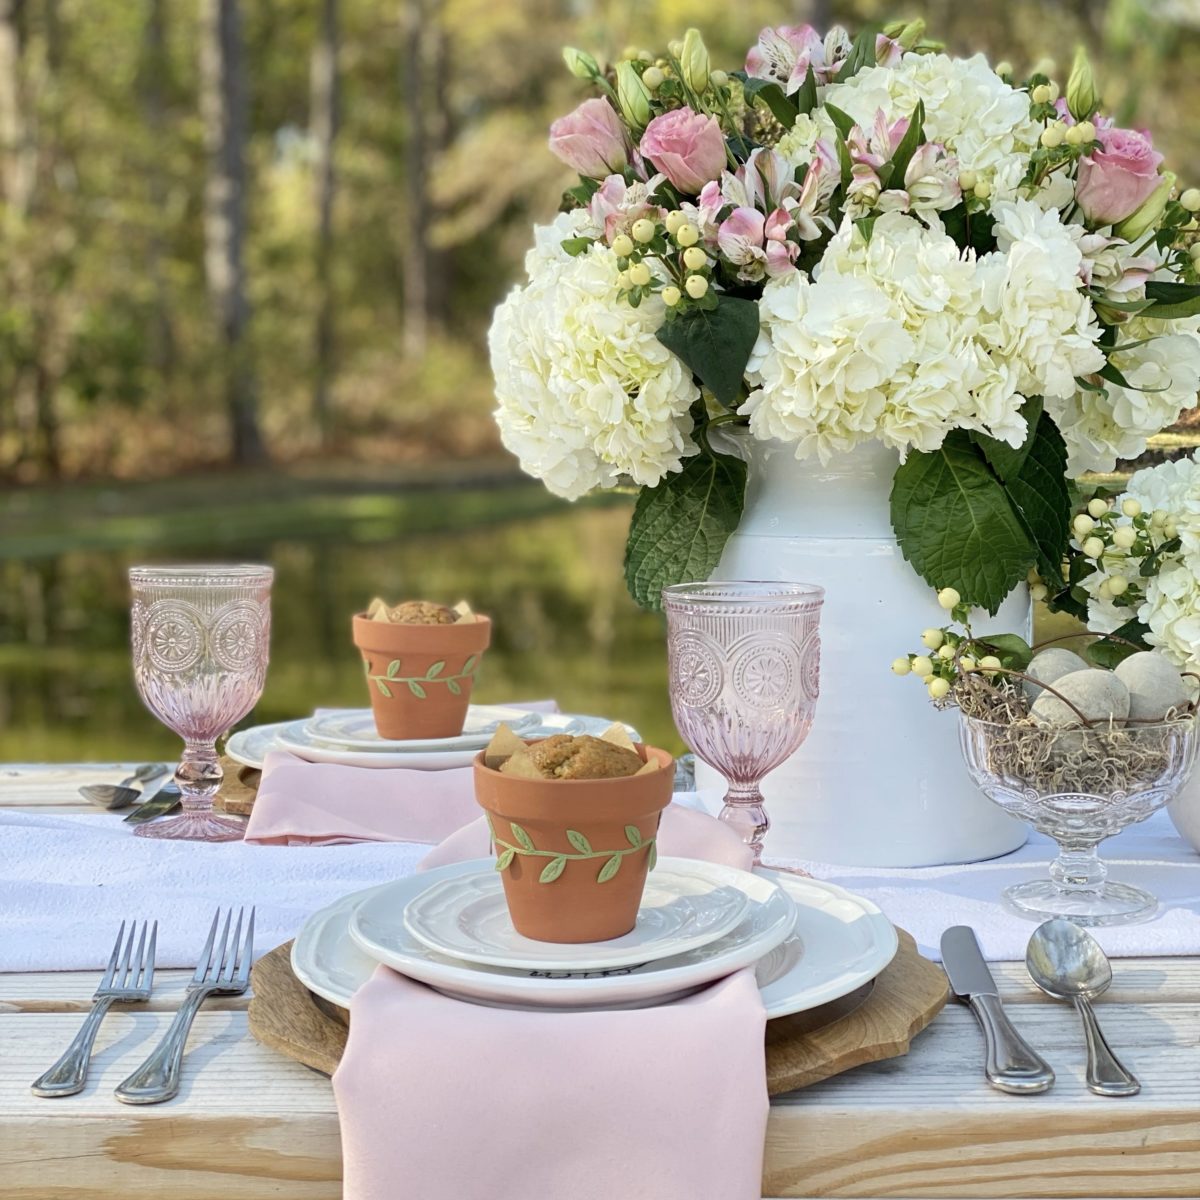 A simple spring table set with white dishes and pink accents on a picnic table by a pond.